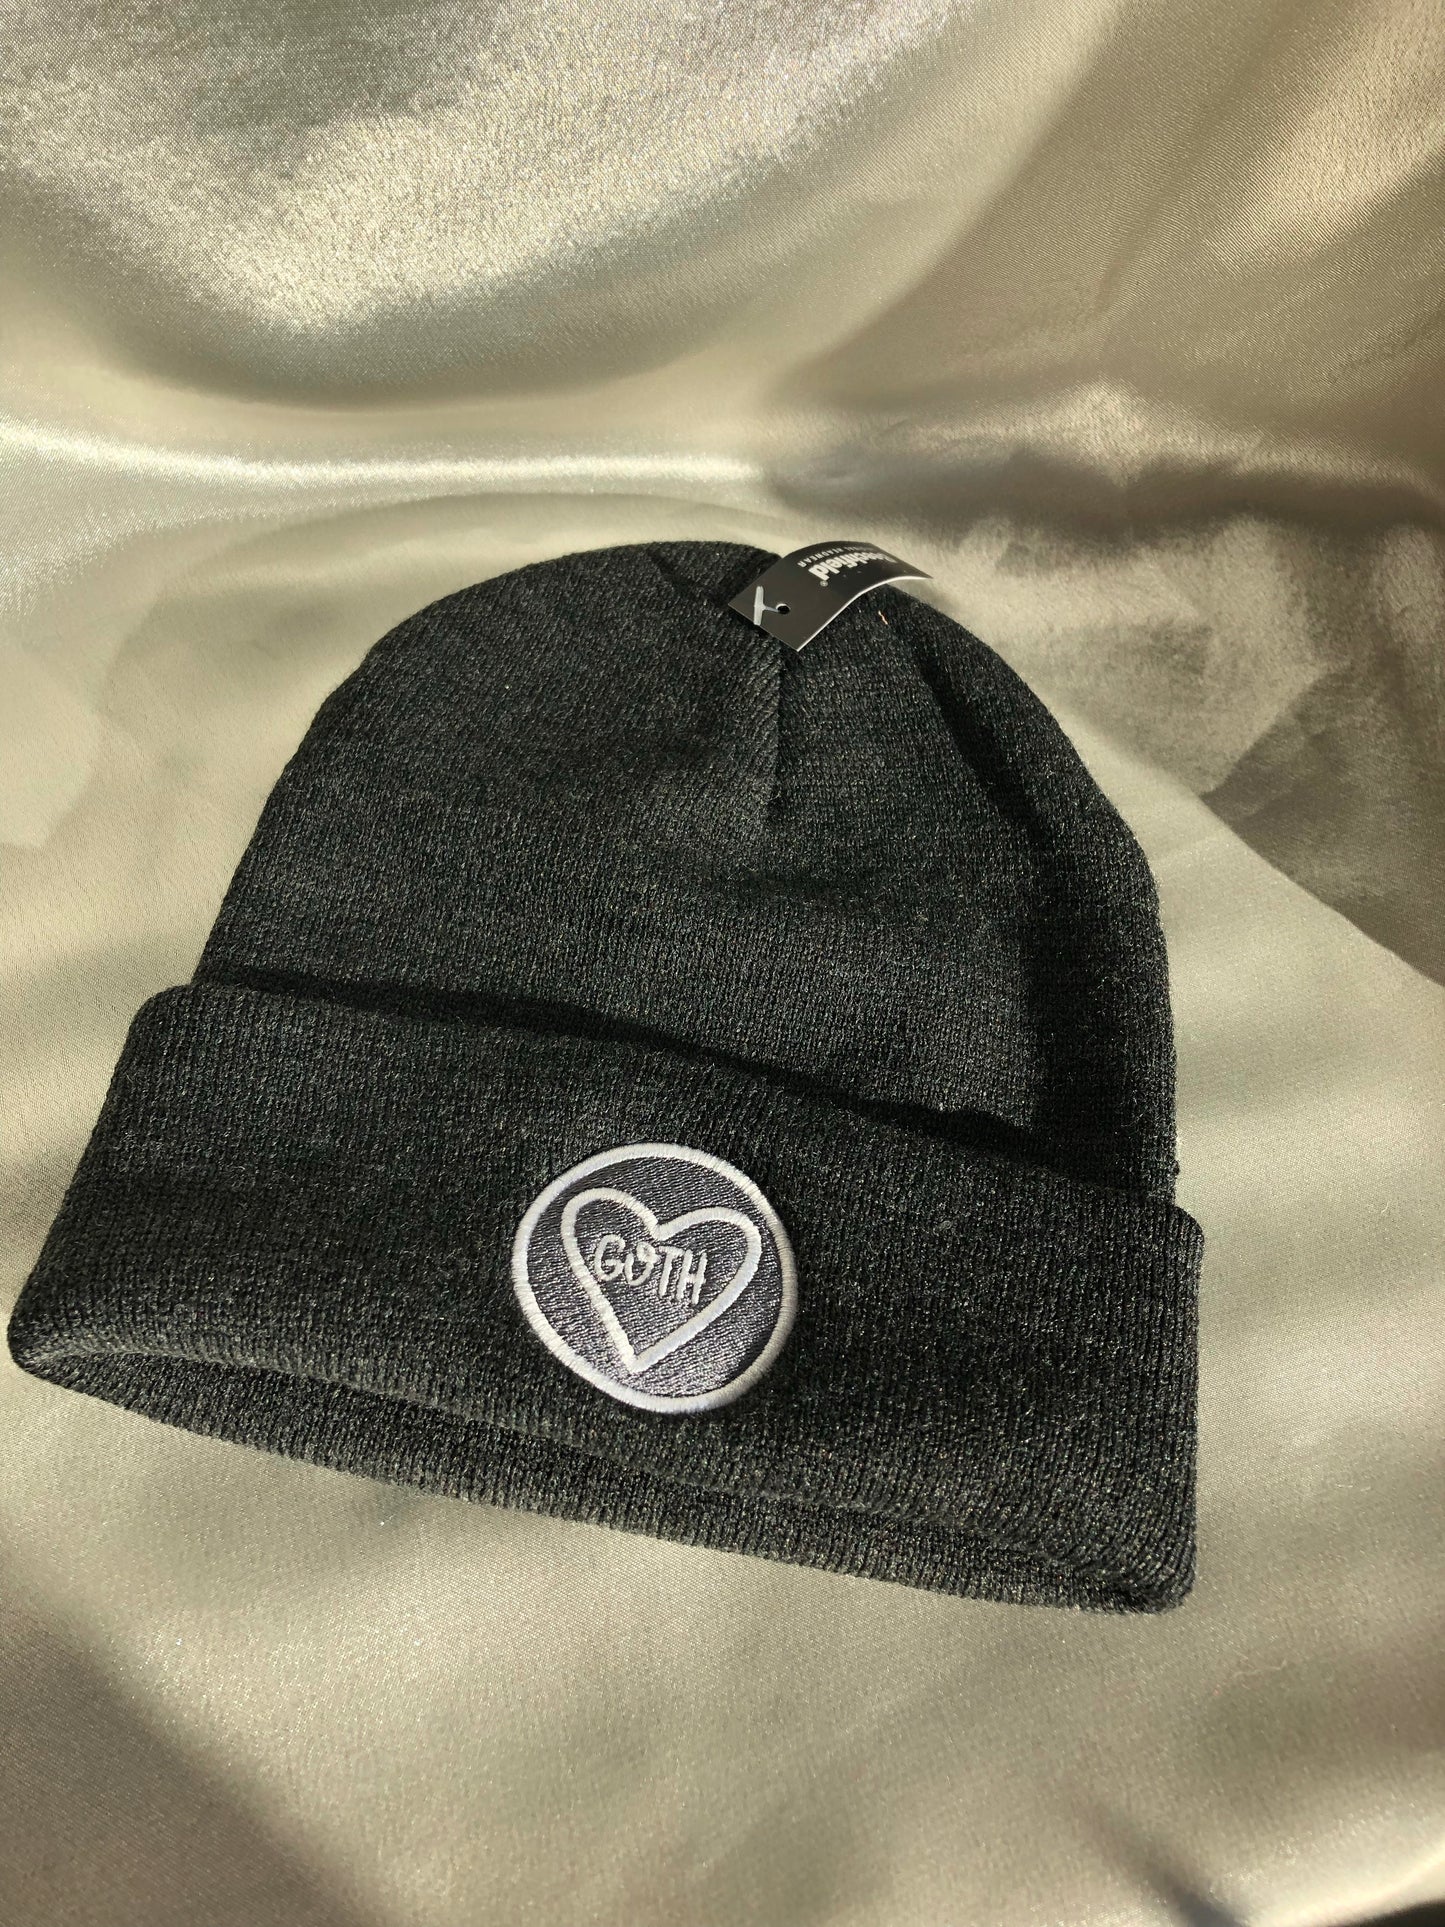 Goth Hat - Ready to Ship